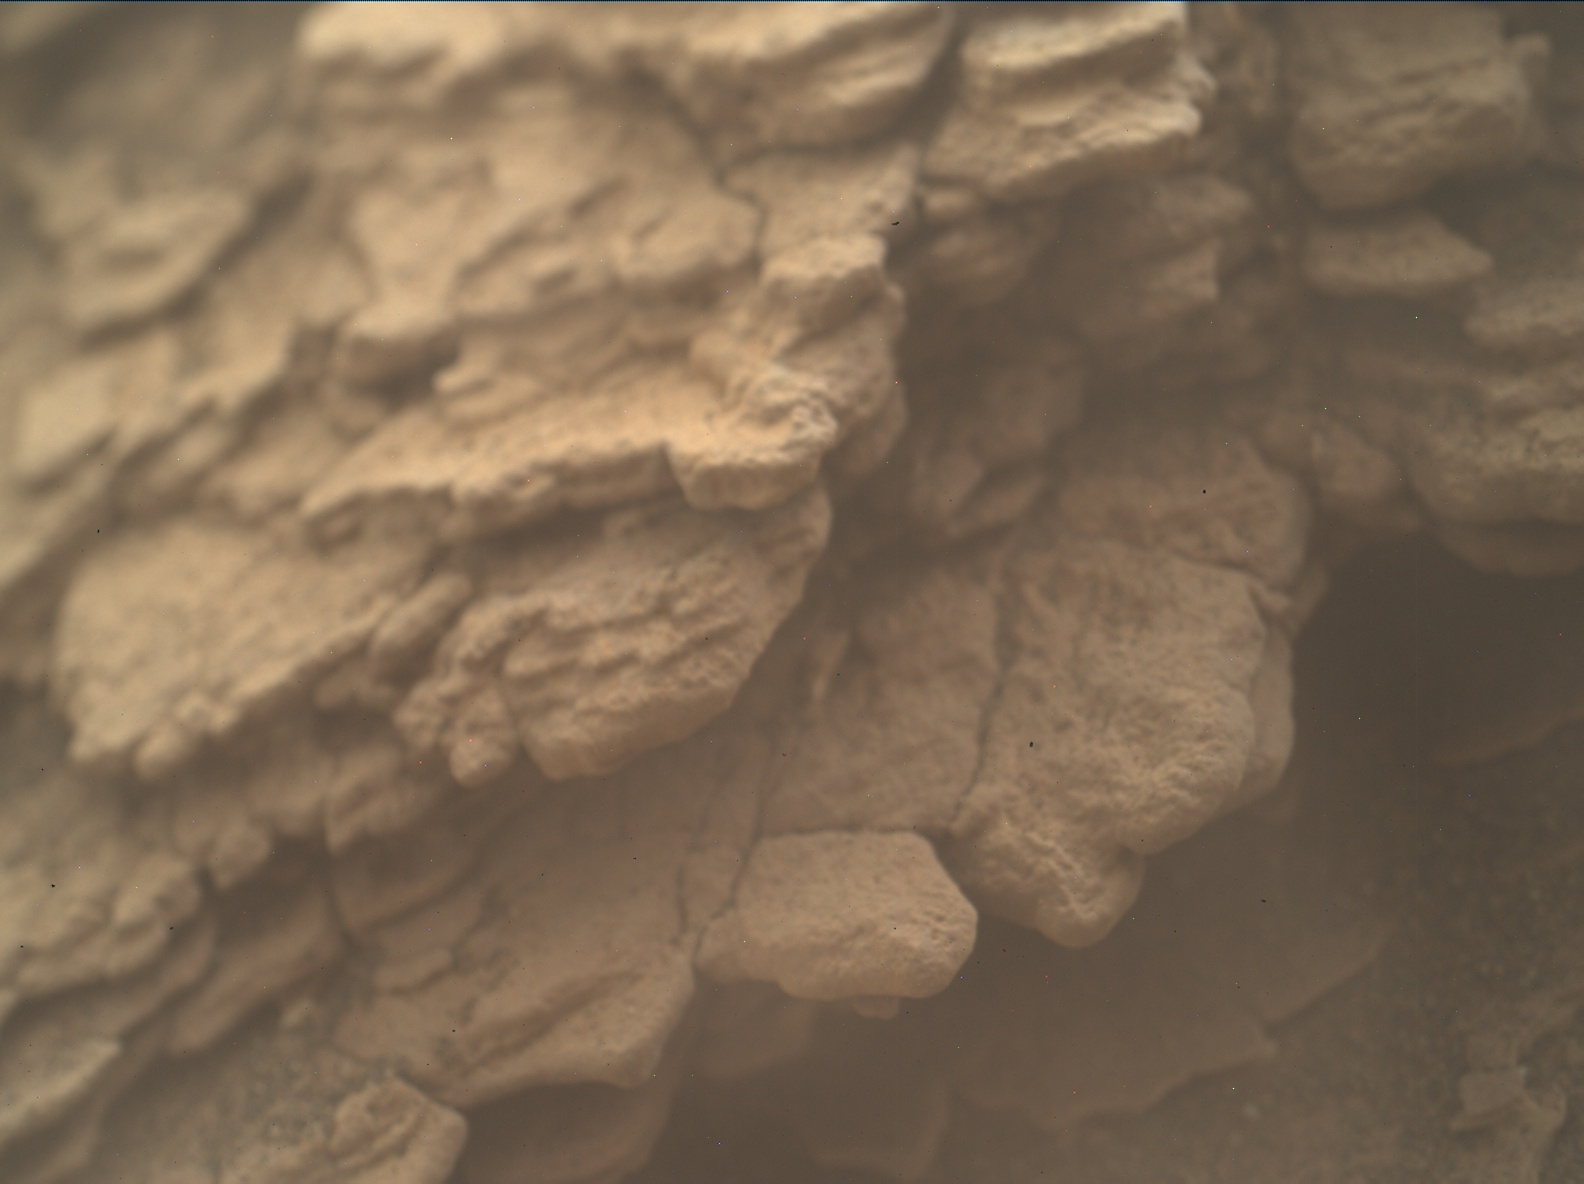 Nasa's Mars rover Curiosity acquired this image using its Mars Hand Lens Imager (MAHLI) on Sol 2458